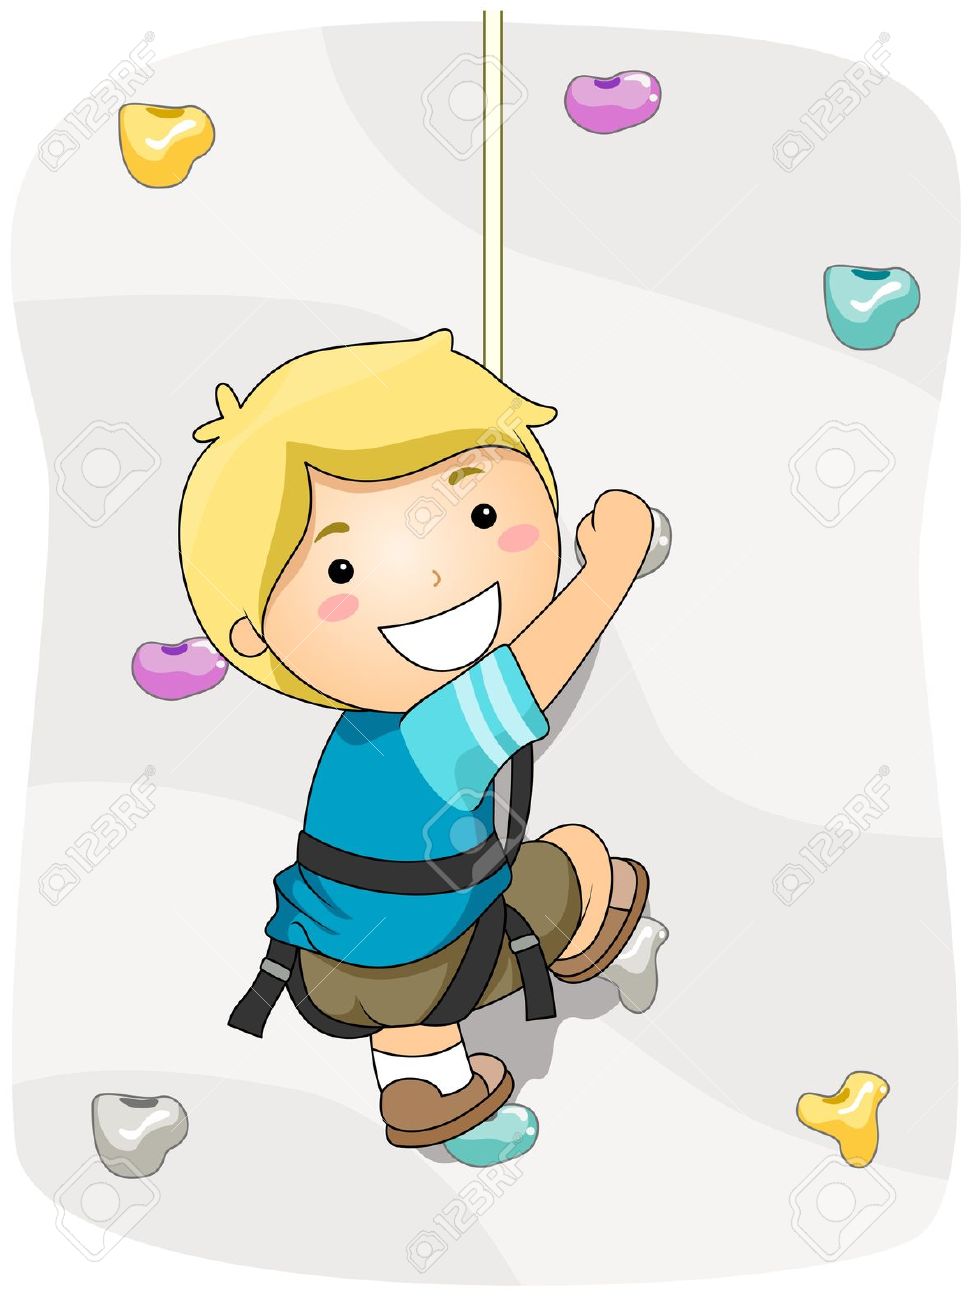 free clipart images rock climbing - photo #28